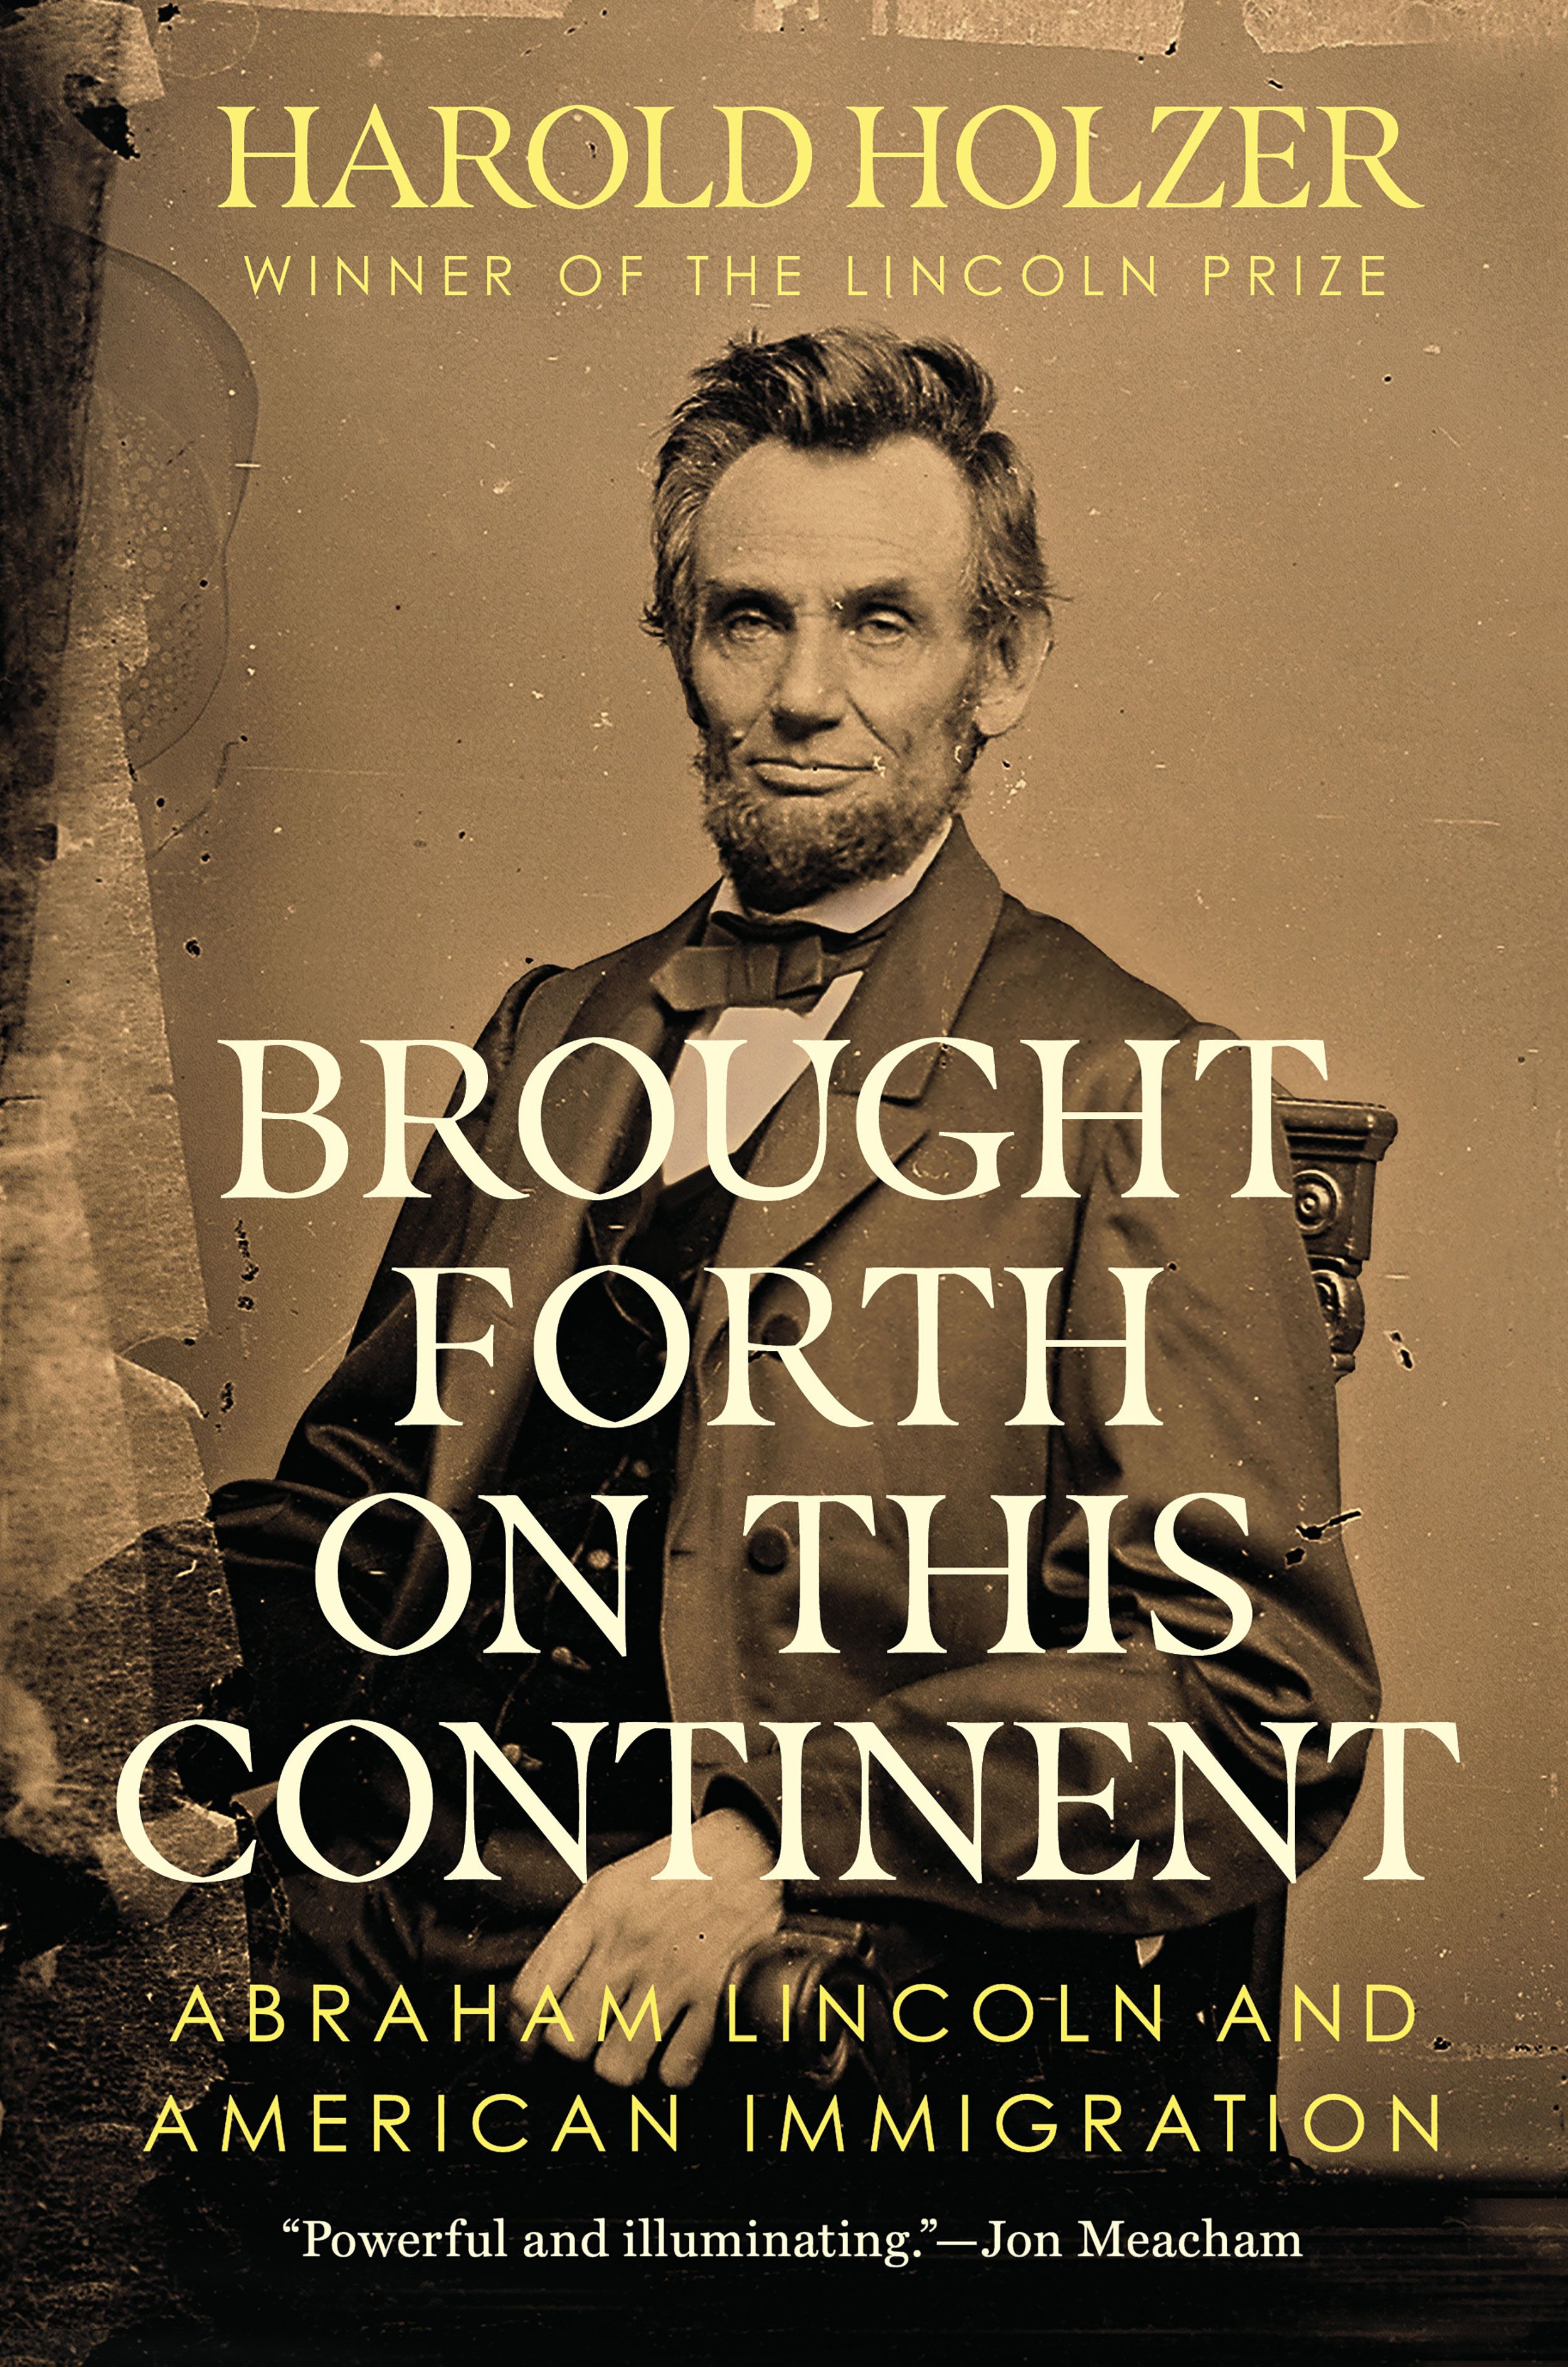 New Harold Holzer book explores Abraham Lincoln's immigration